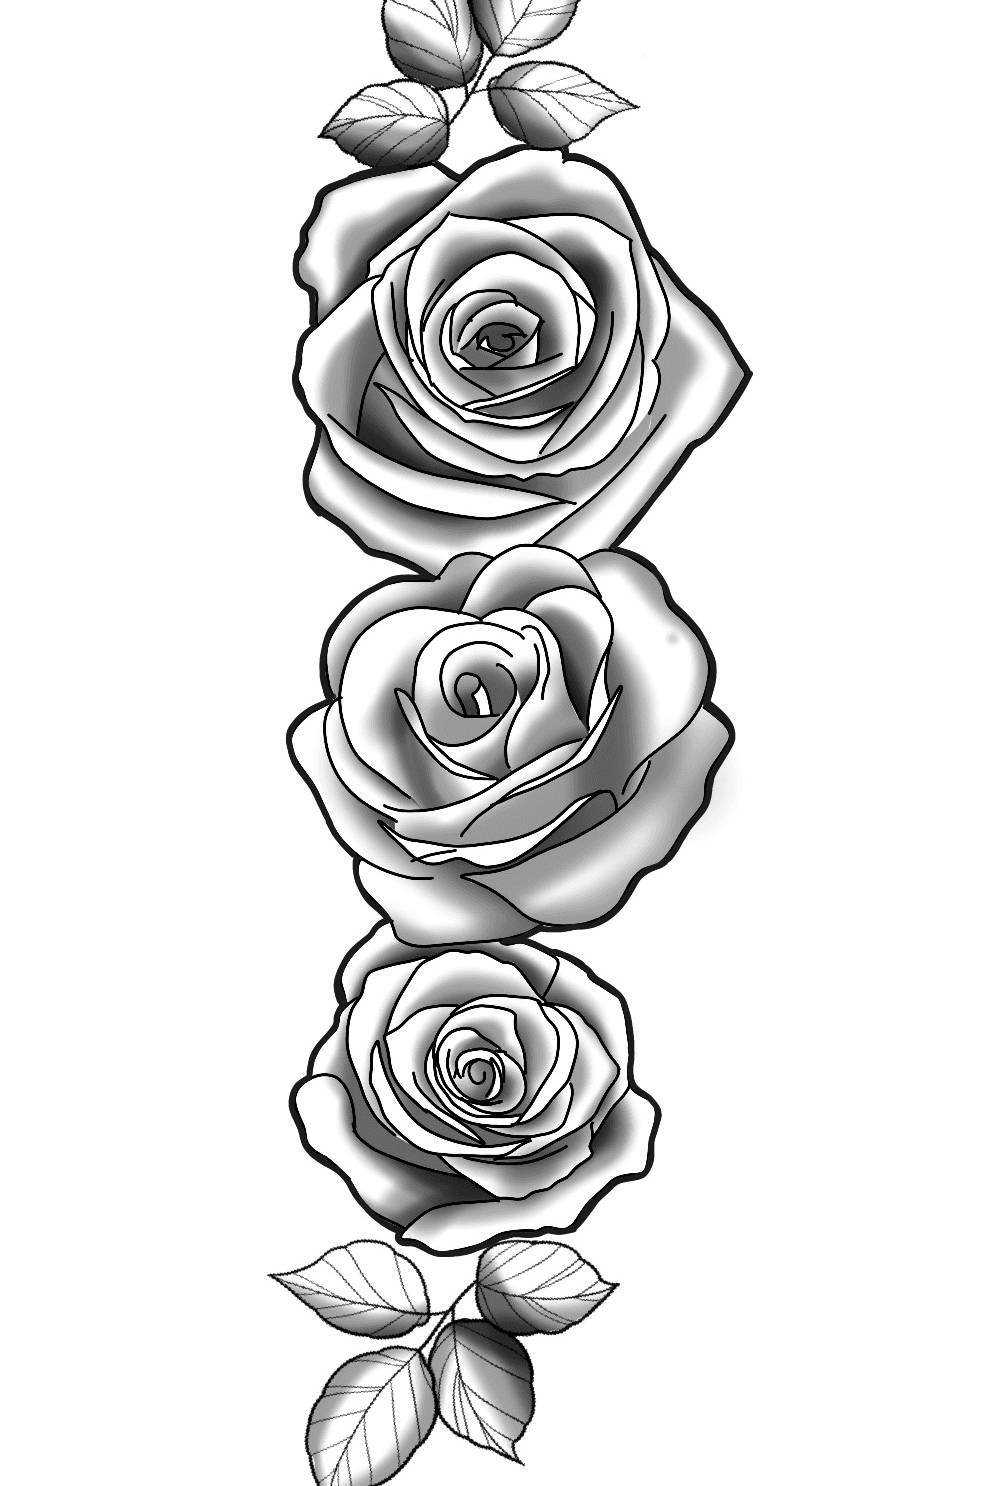 roses design drawing tattoo  Clip Art Library